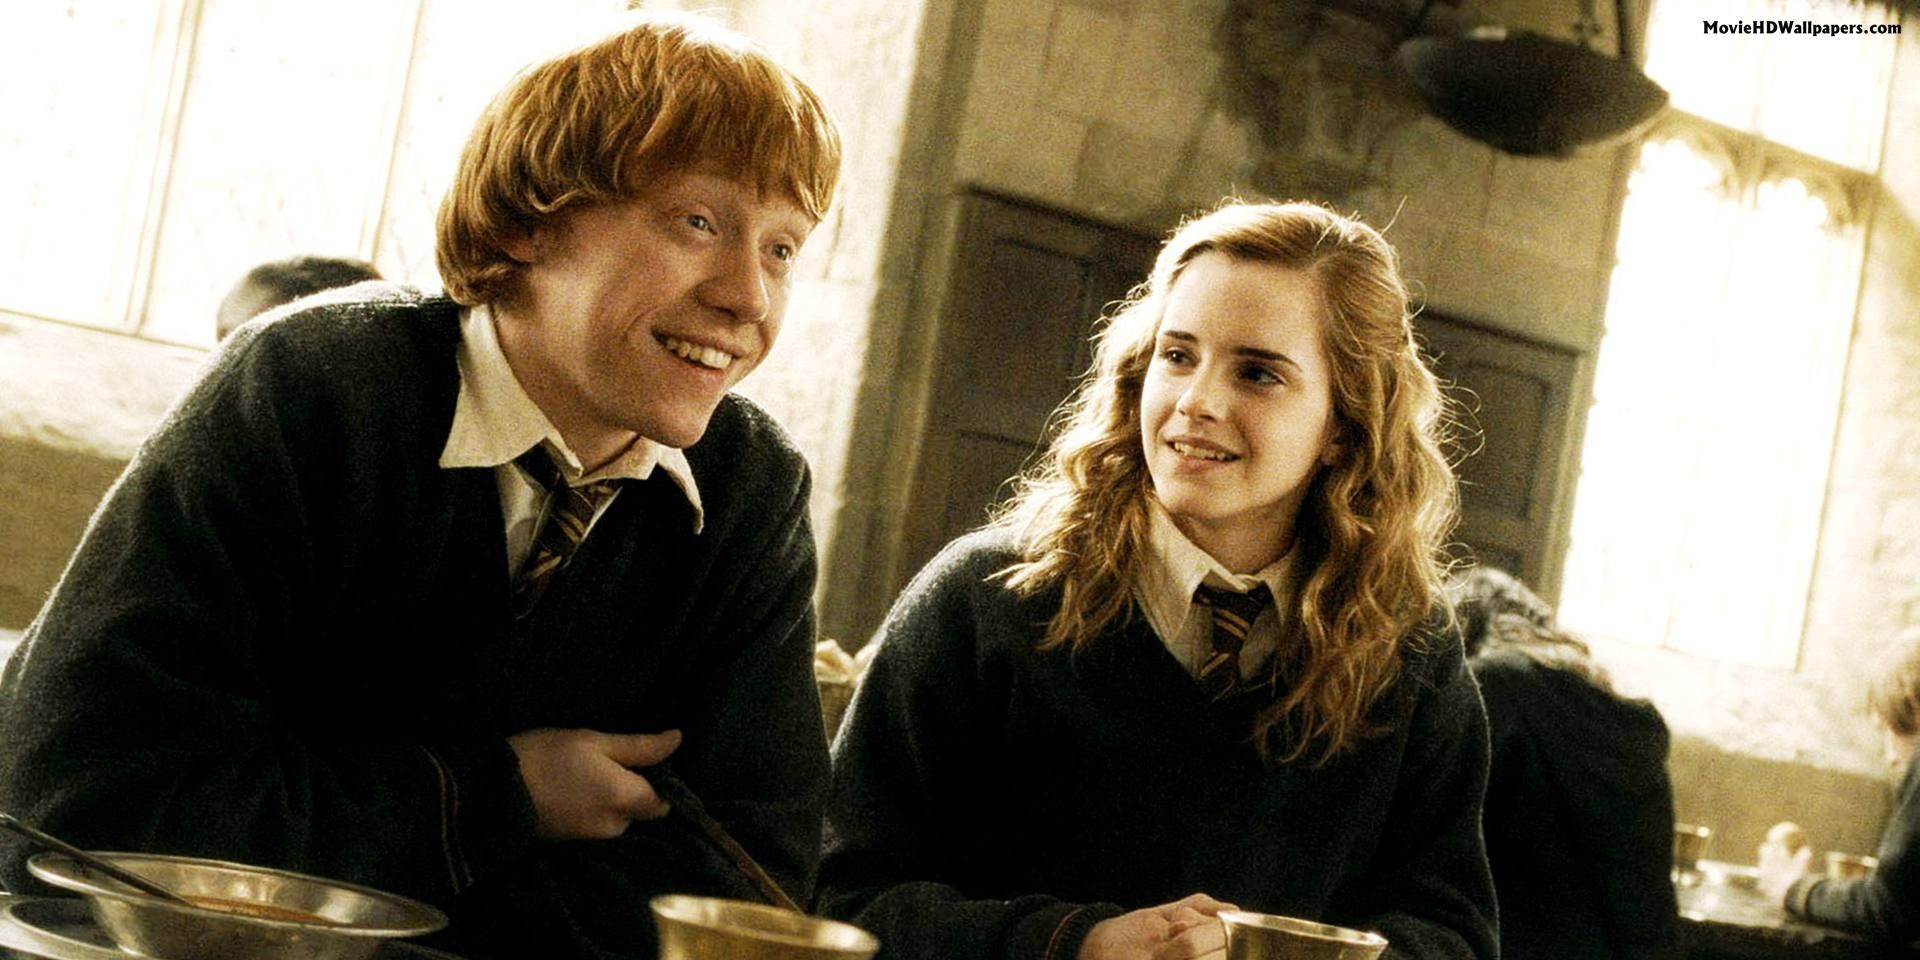 Ron and Hermione laugh in the Great Hall in Harry Potter.